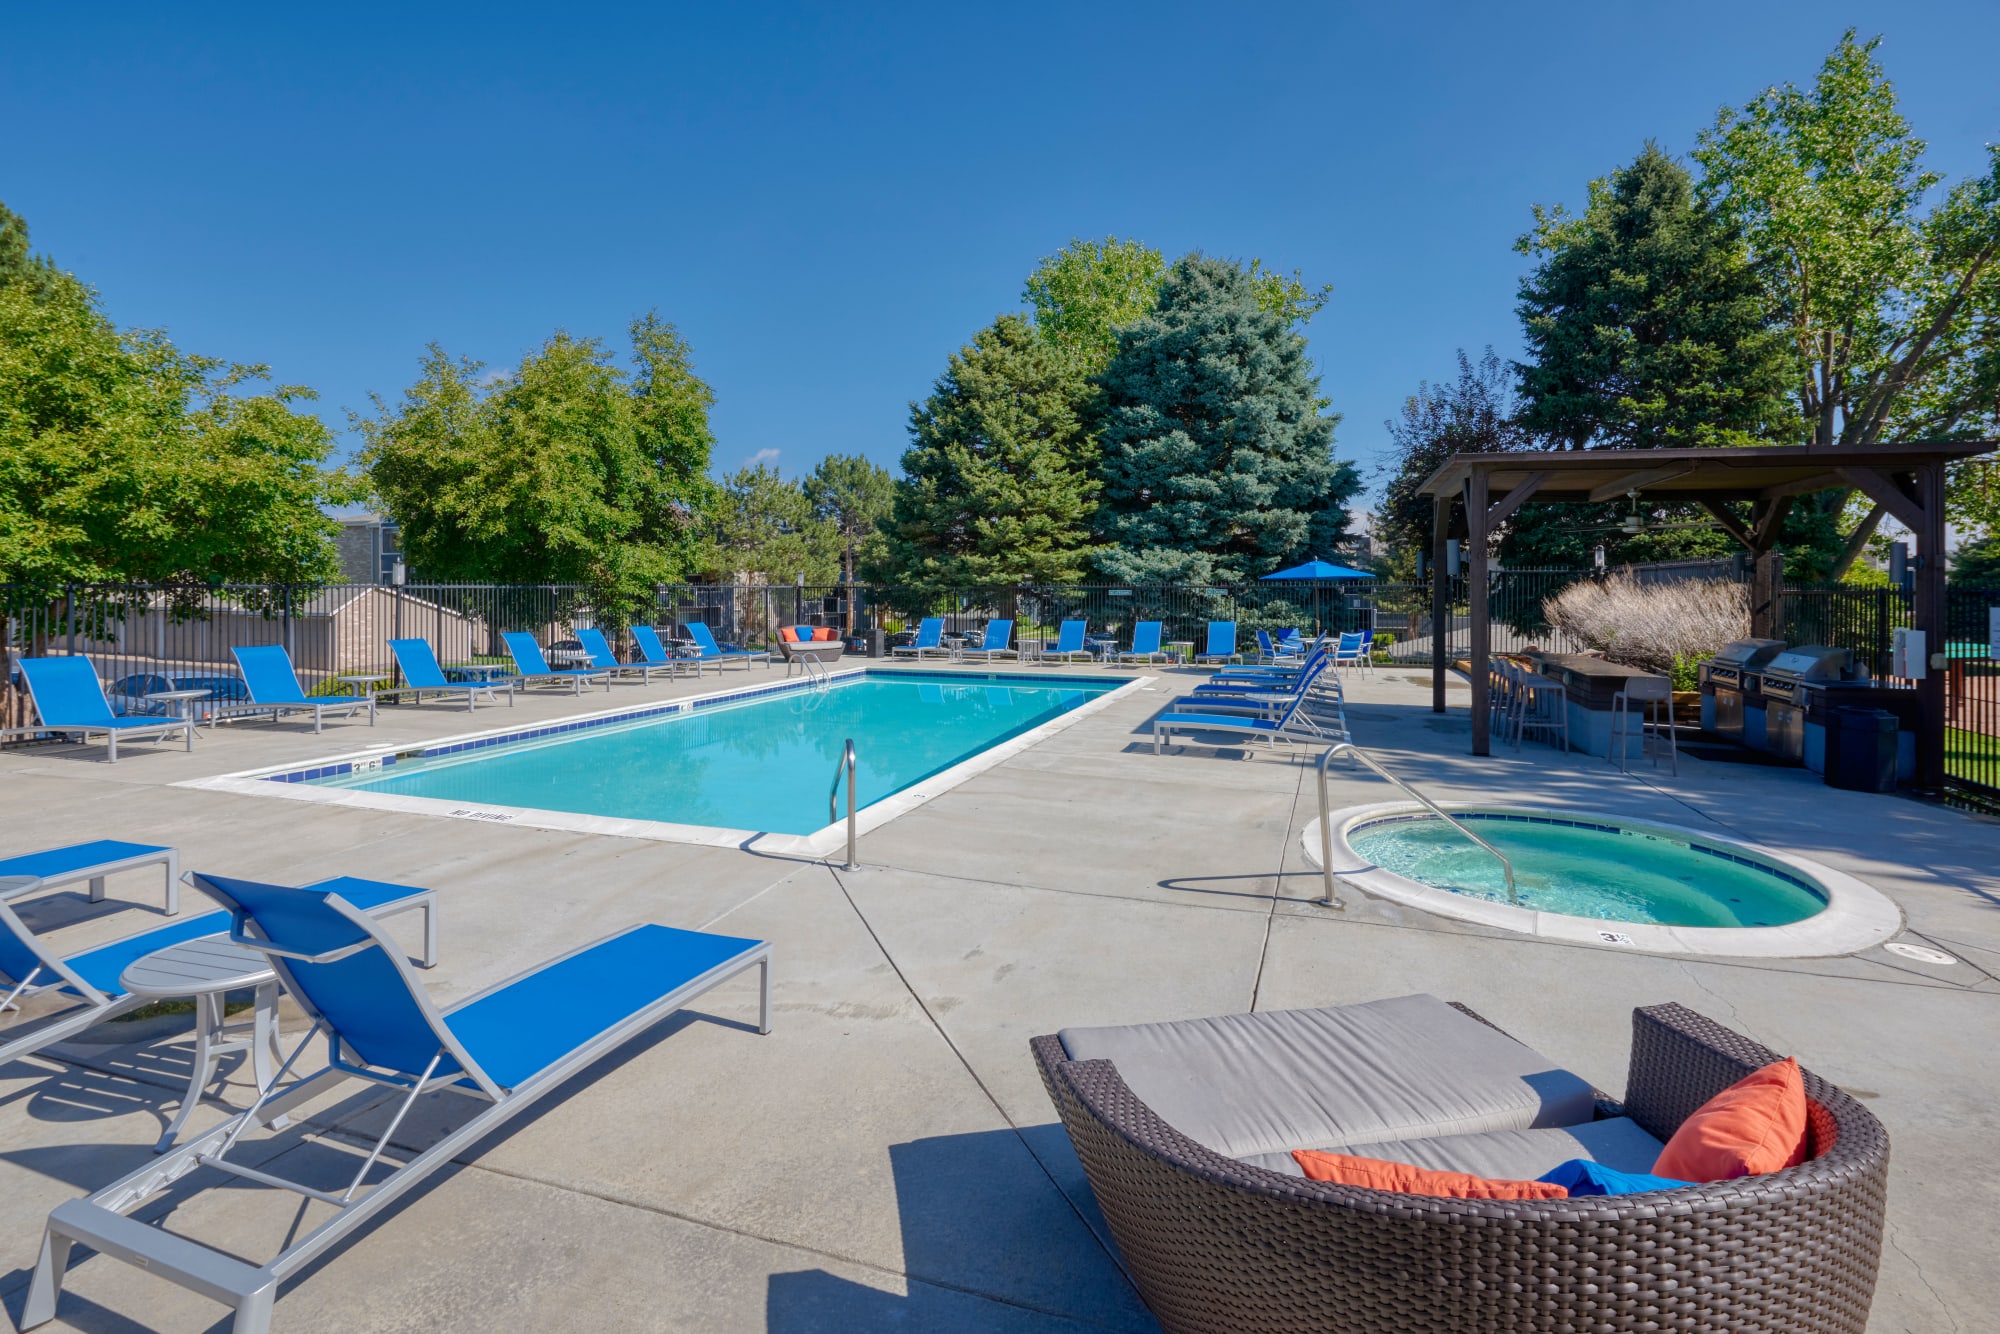 Swimming pool with lounge chairs at sunset at Alton Green Apartments in Denver, Colorado